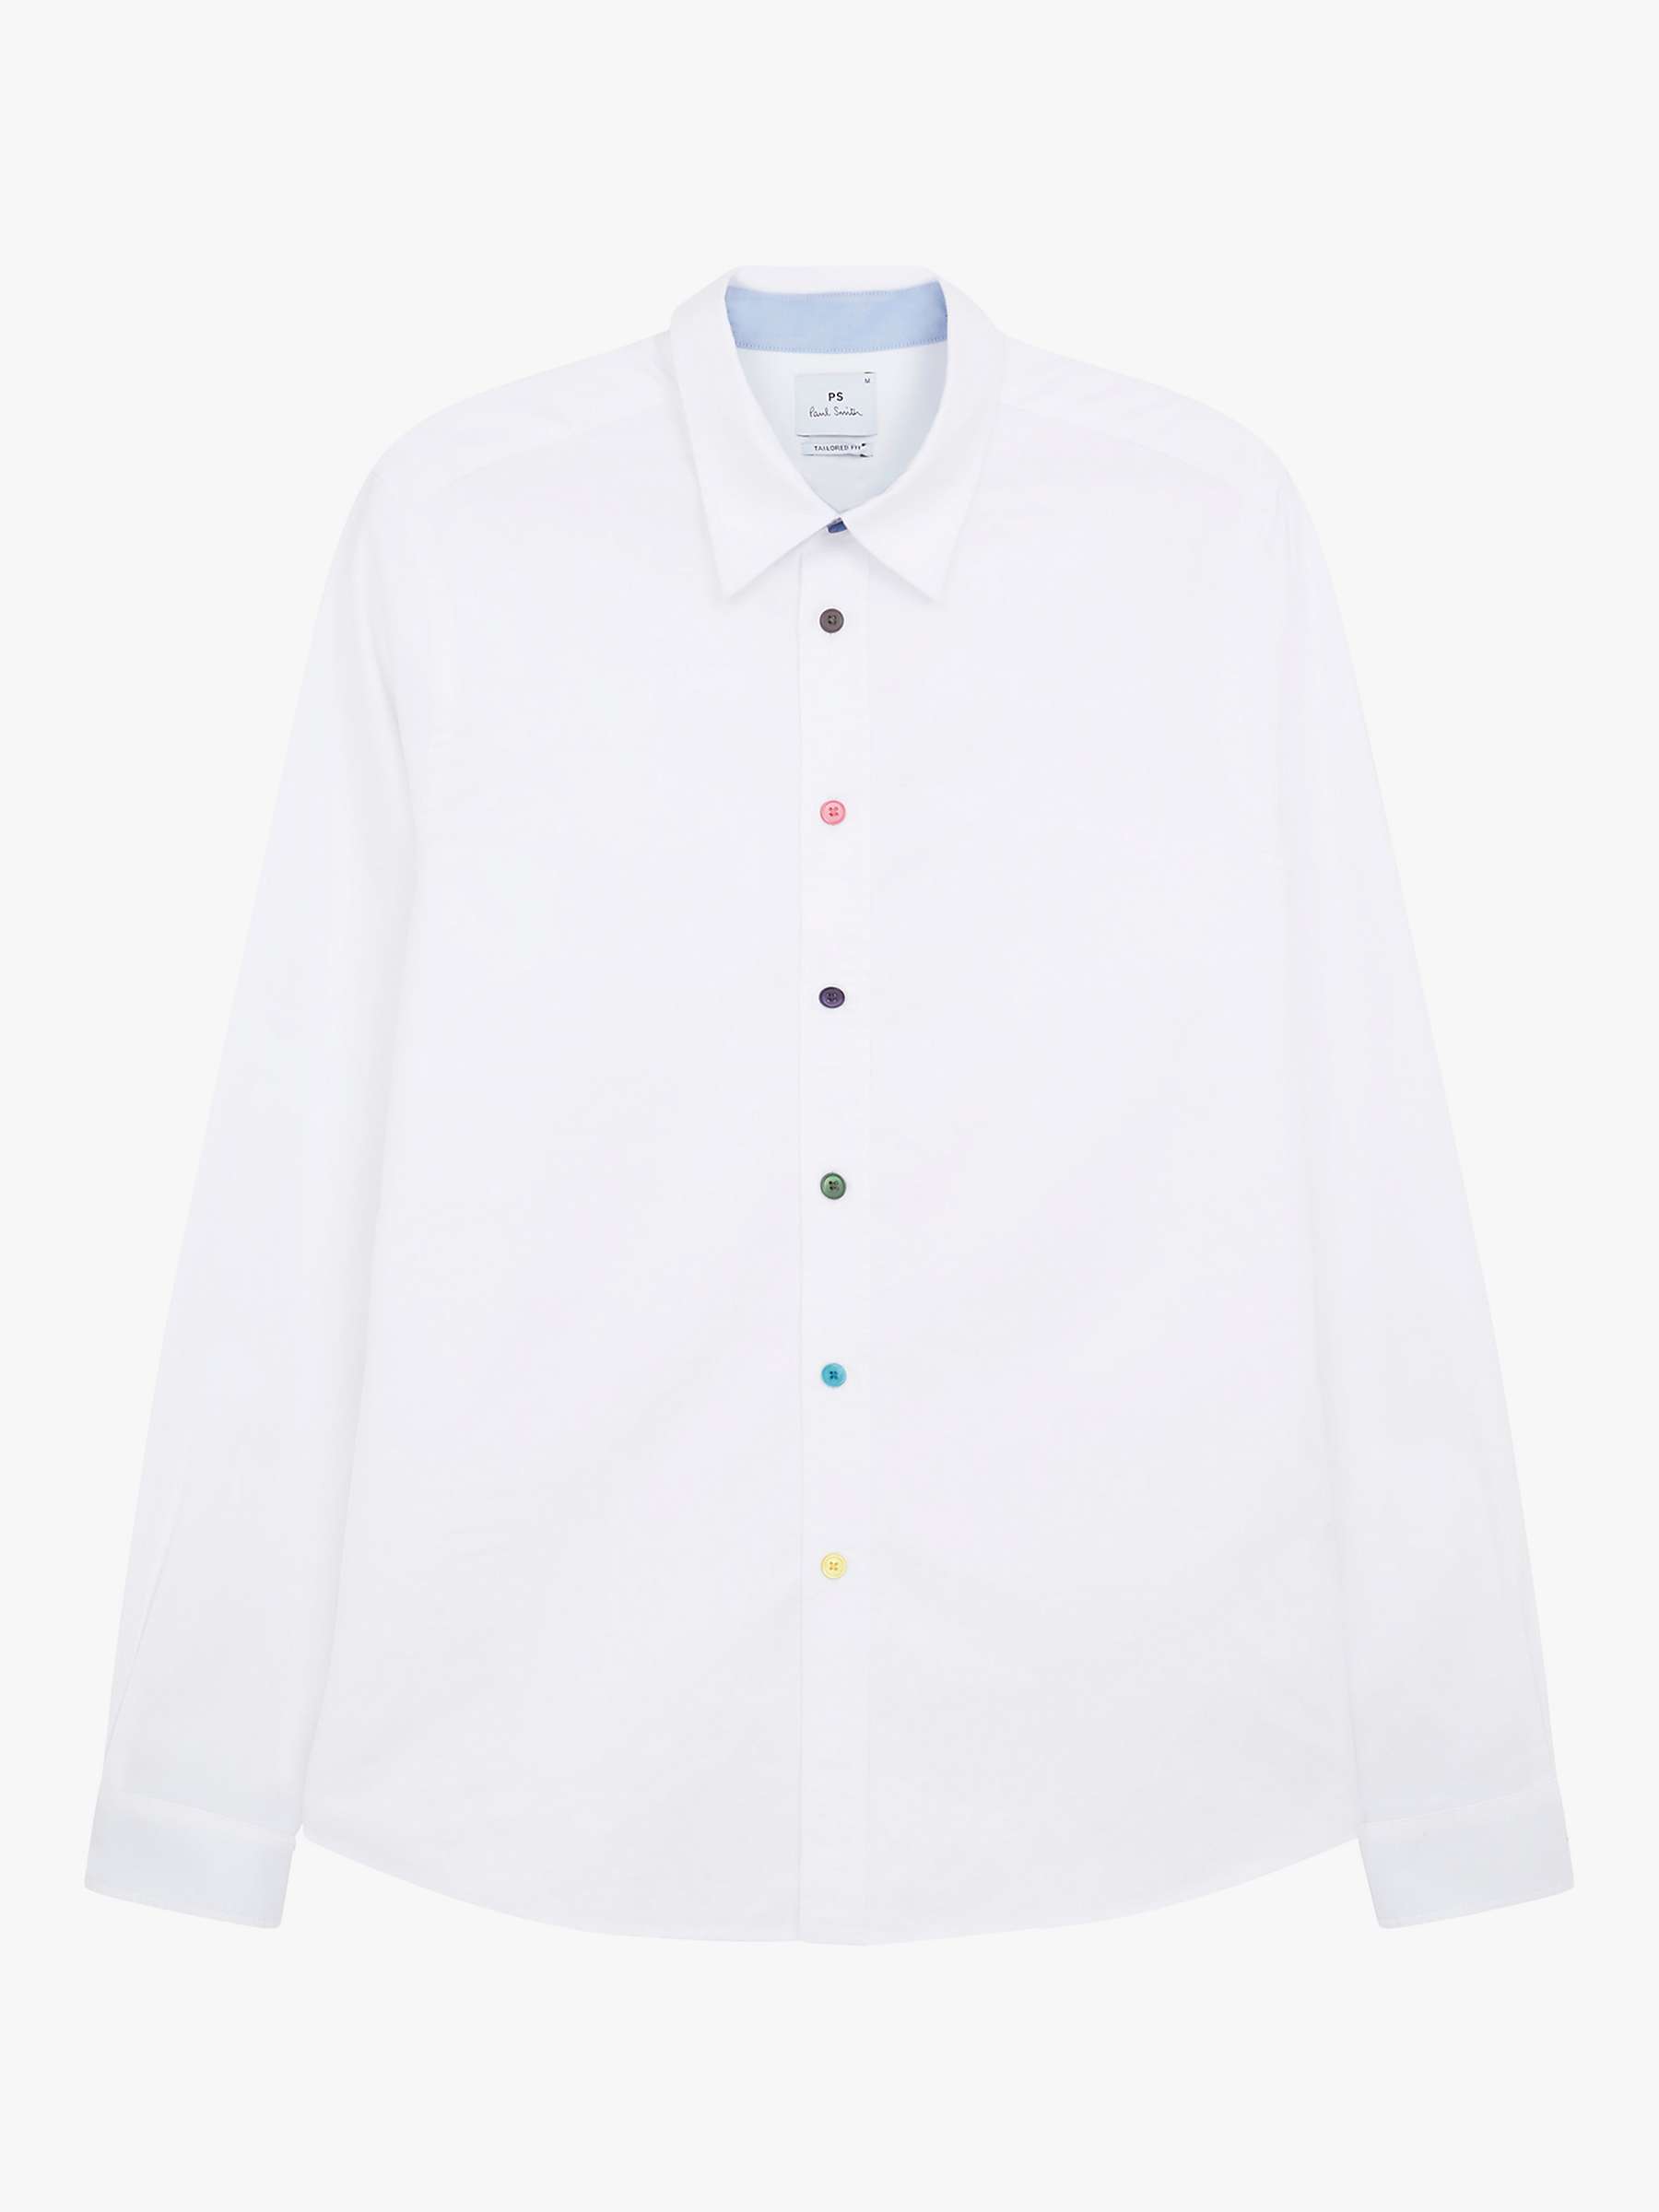 Buy Paul Smith Organic Cotton Tailored Fit Oxford Shirt, White/Multi Online at johnlewis.com